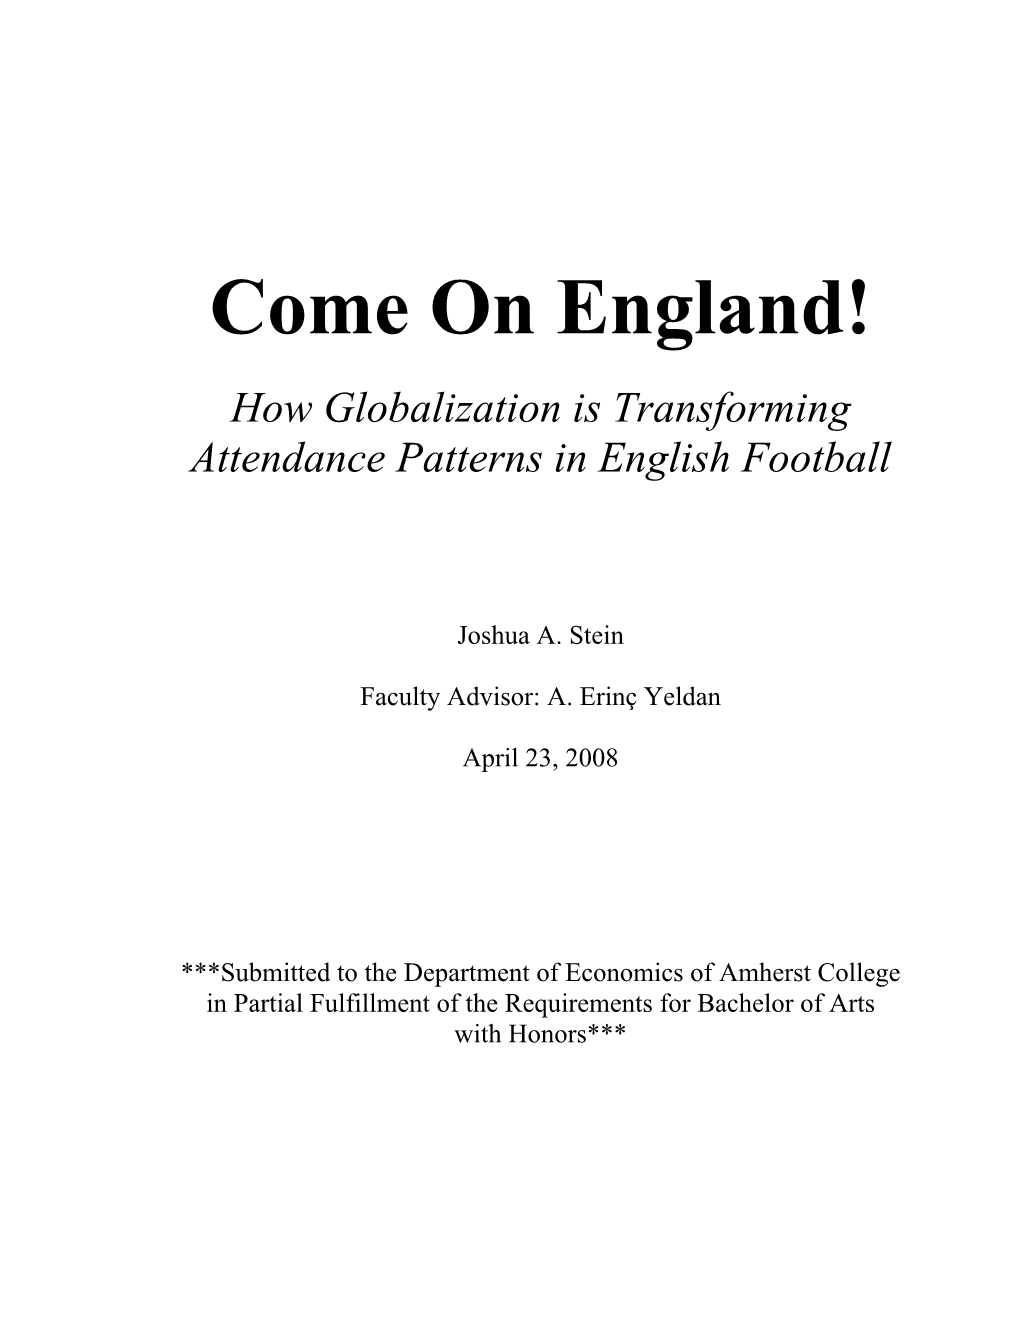 Come on England! How Globalization Is Transforming Attendance